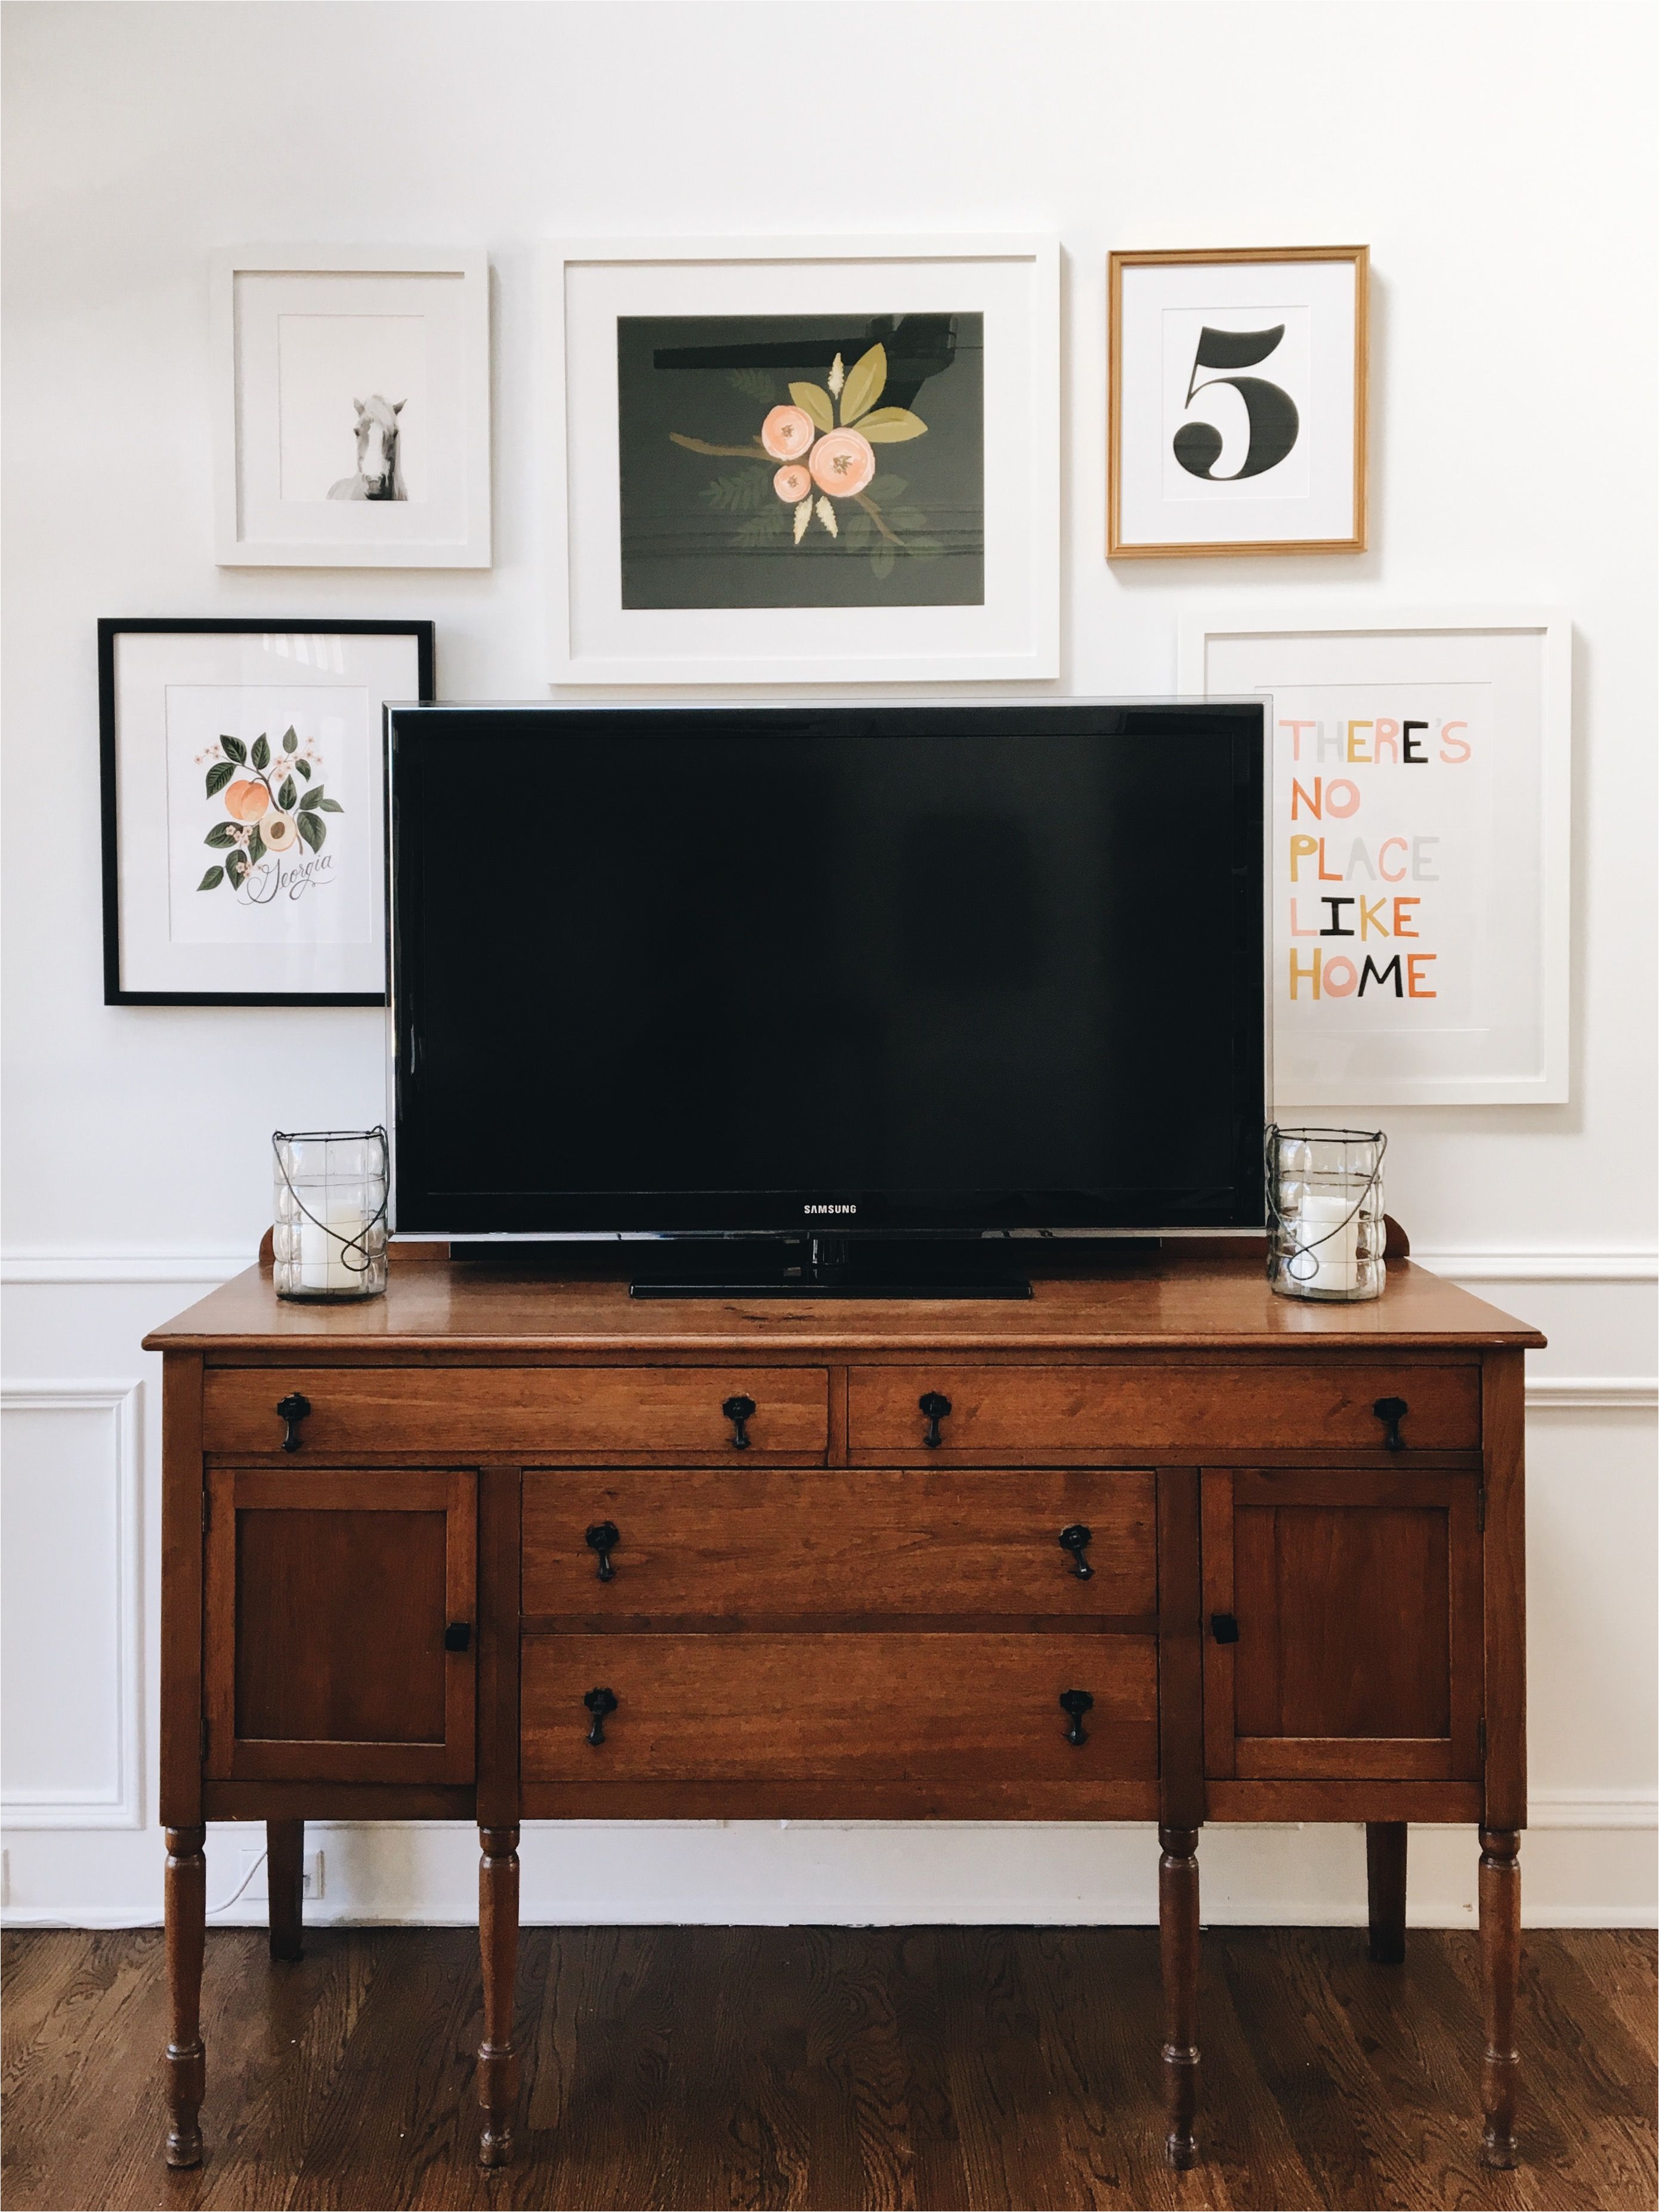 that wooden sideboard below the television gallery wall around the tv click through to see more of this lovely room